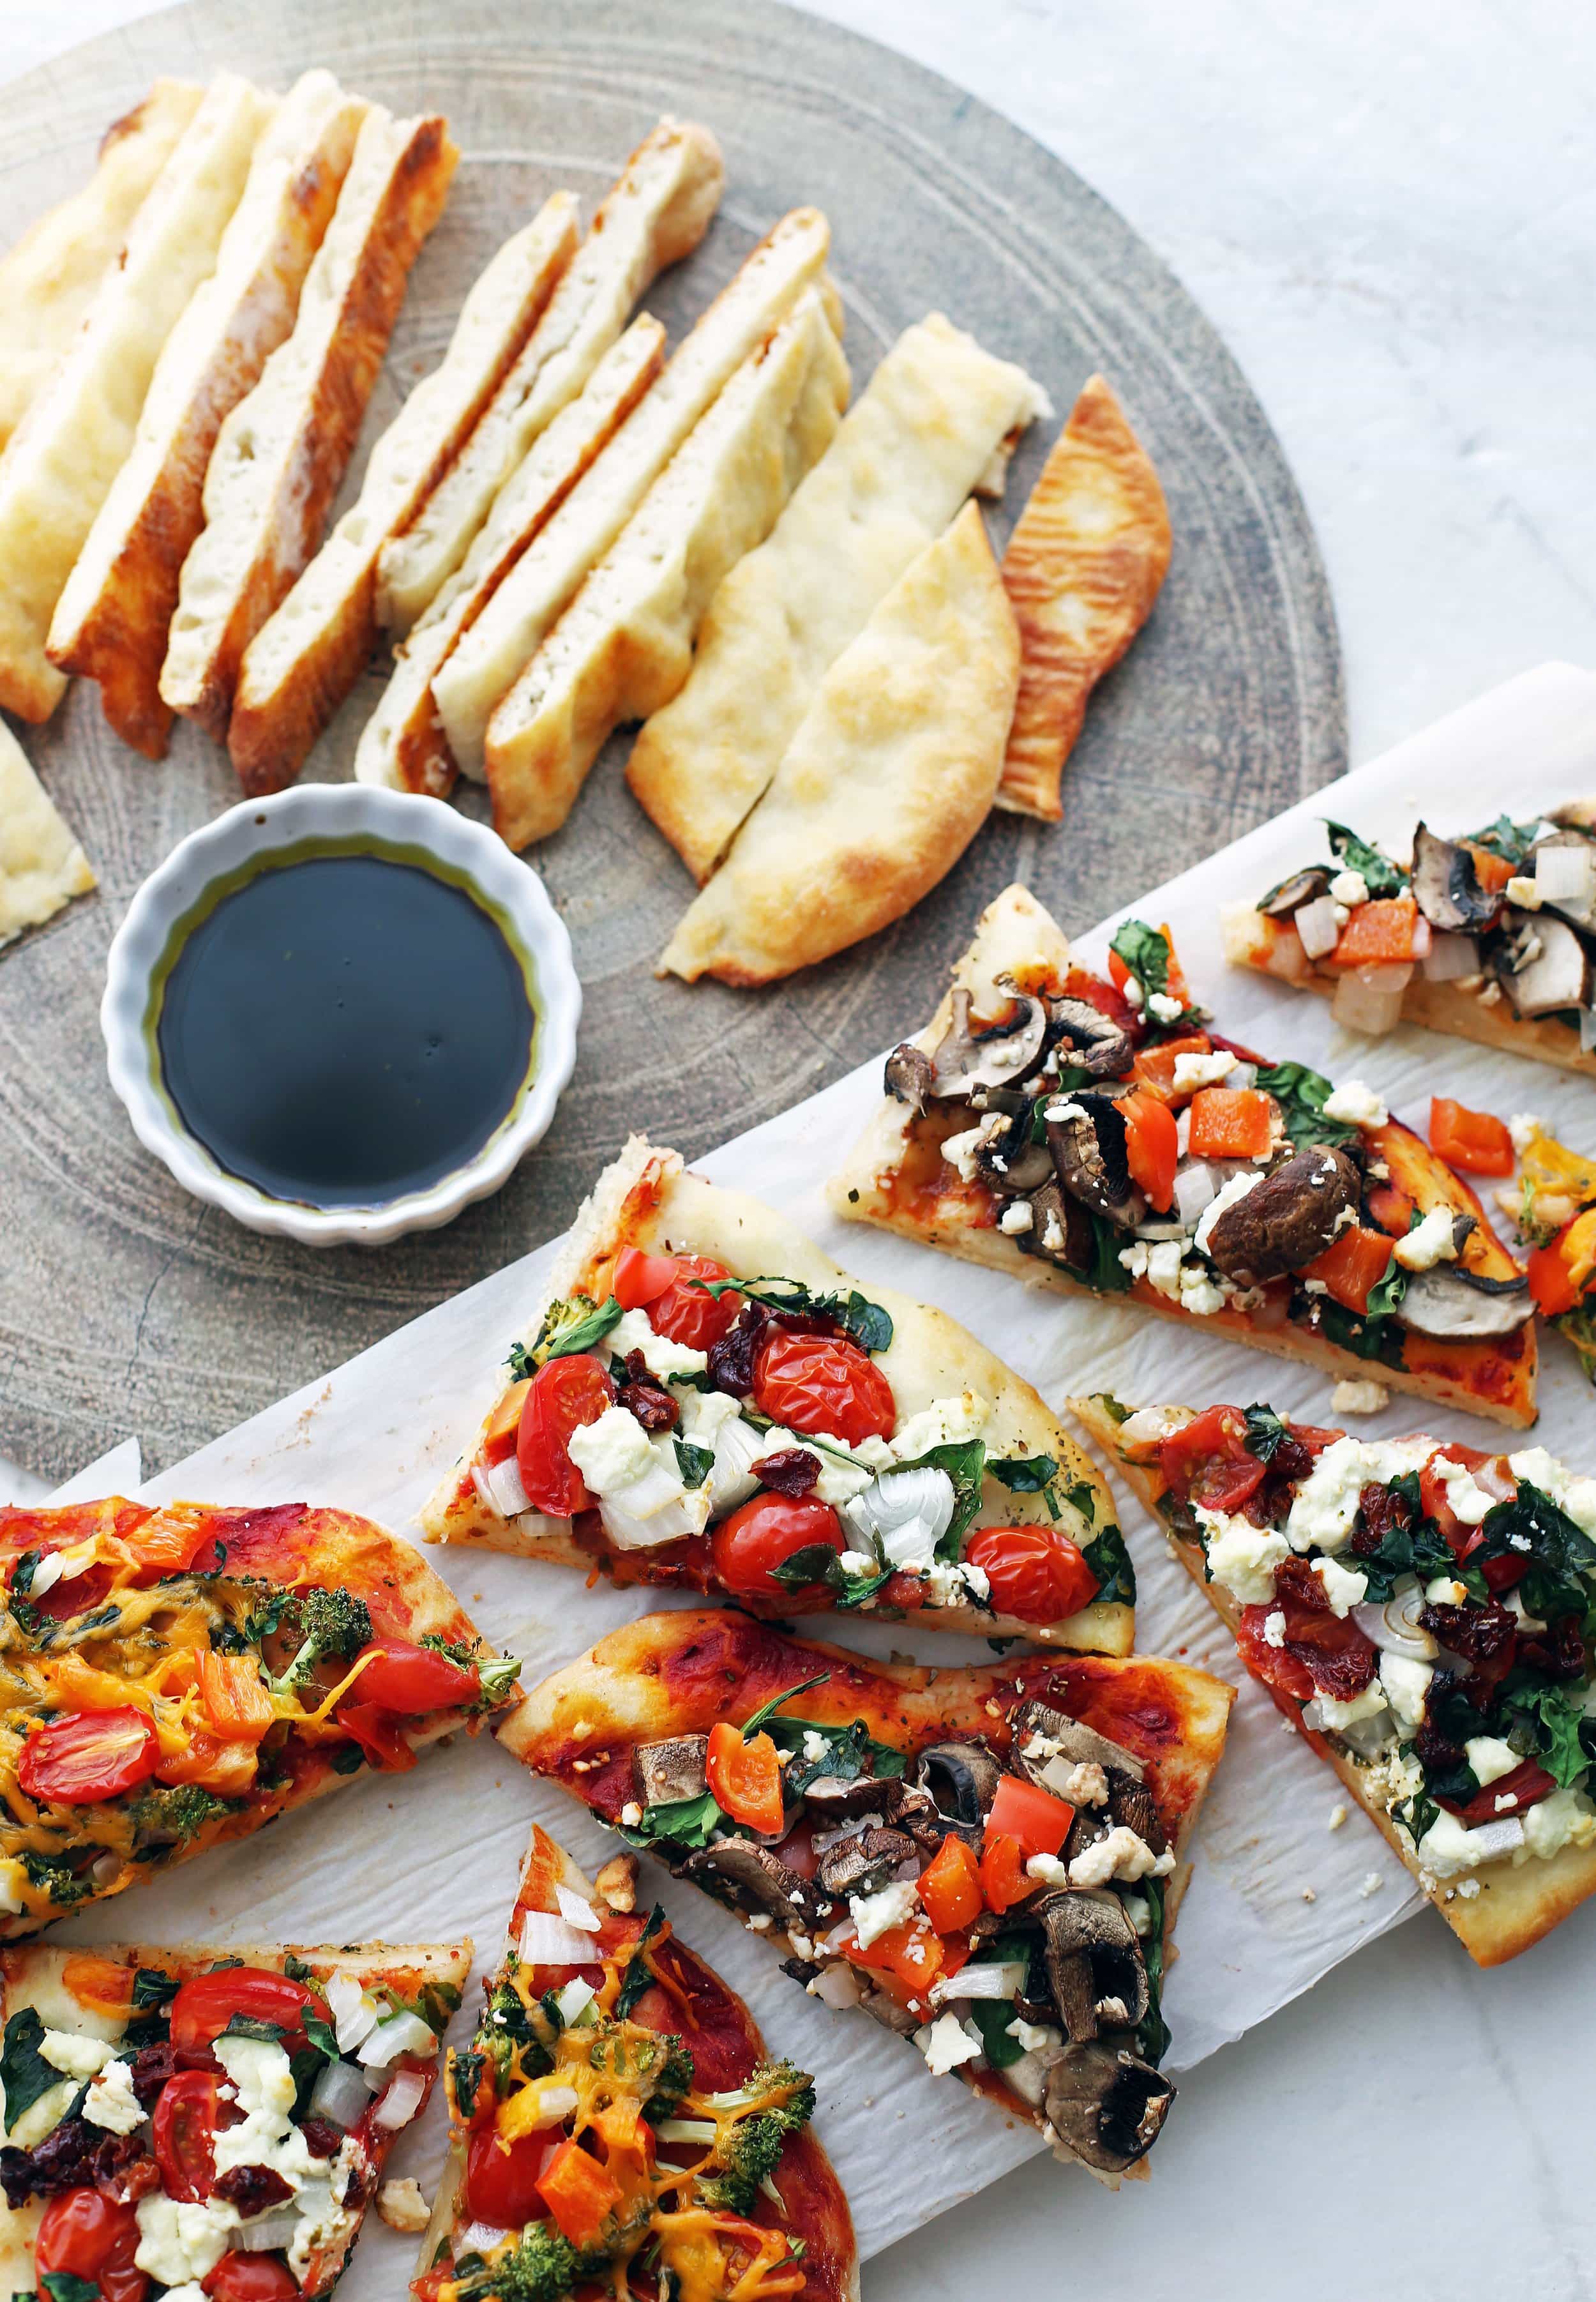 Overhead view of flatbread pizza slices and sliced four-ingredient flatbread with dip on two platters.